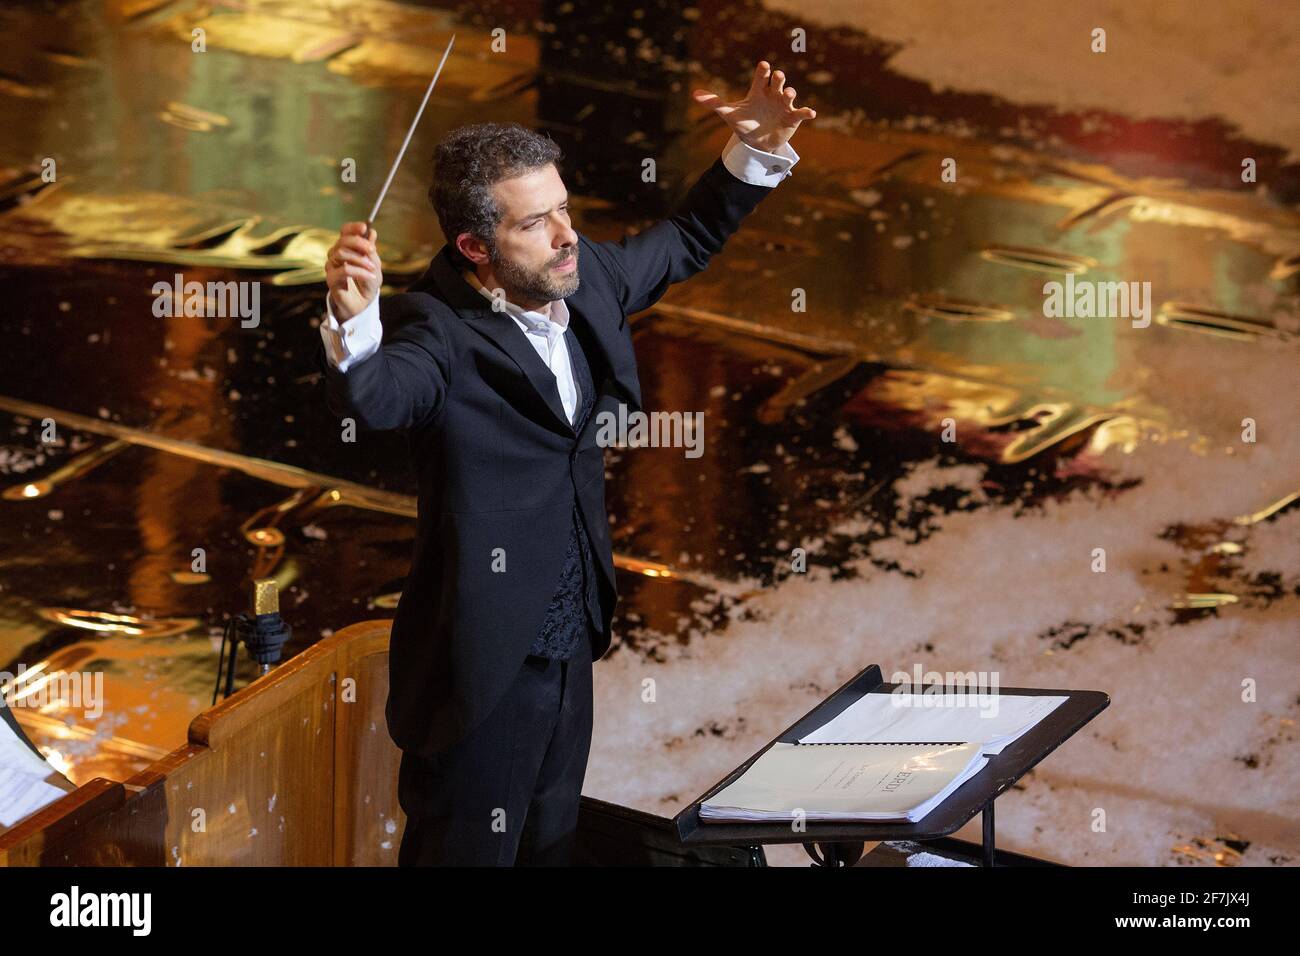 Israeli Maestro Omer Meir Wellber conducting at the Teatro Massimo in Palermo, Sicily, Italy,Europe. Stock Photo